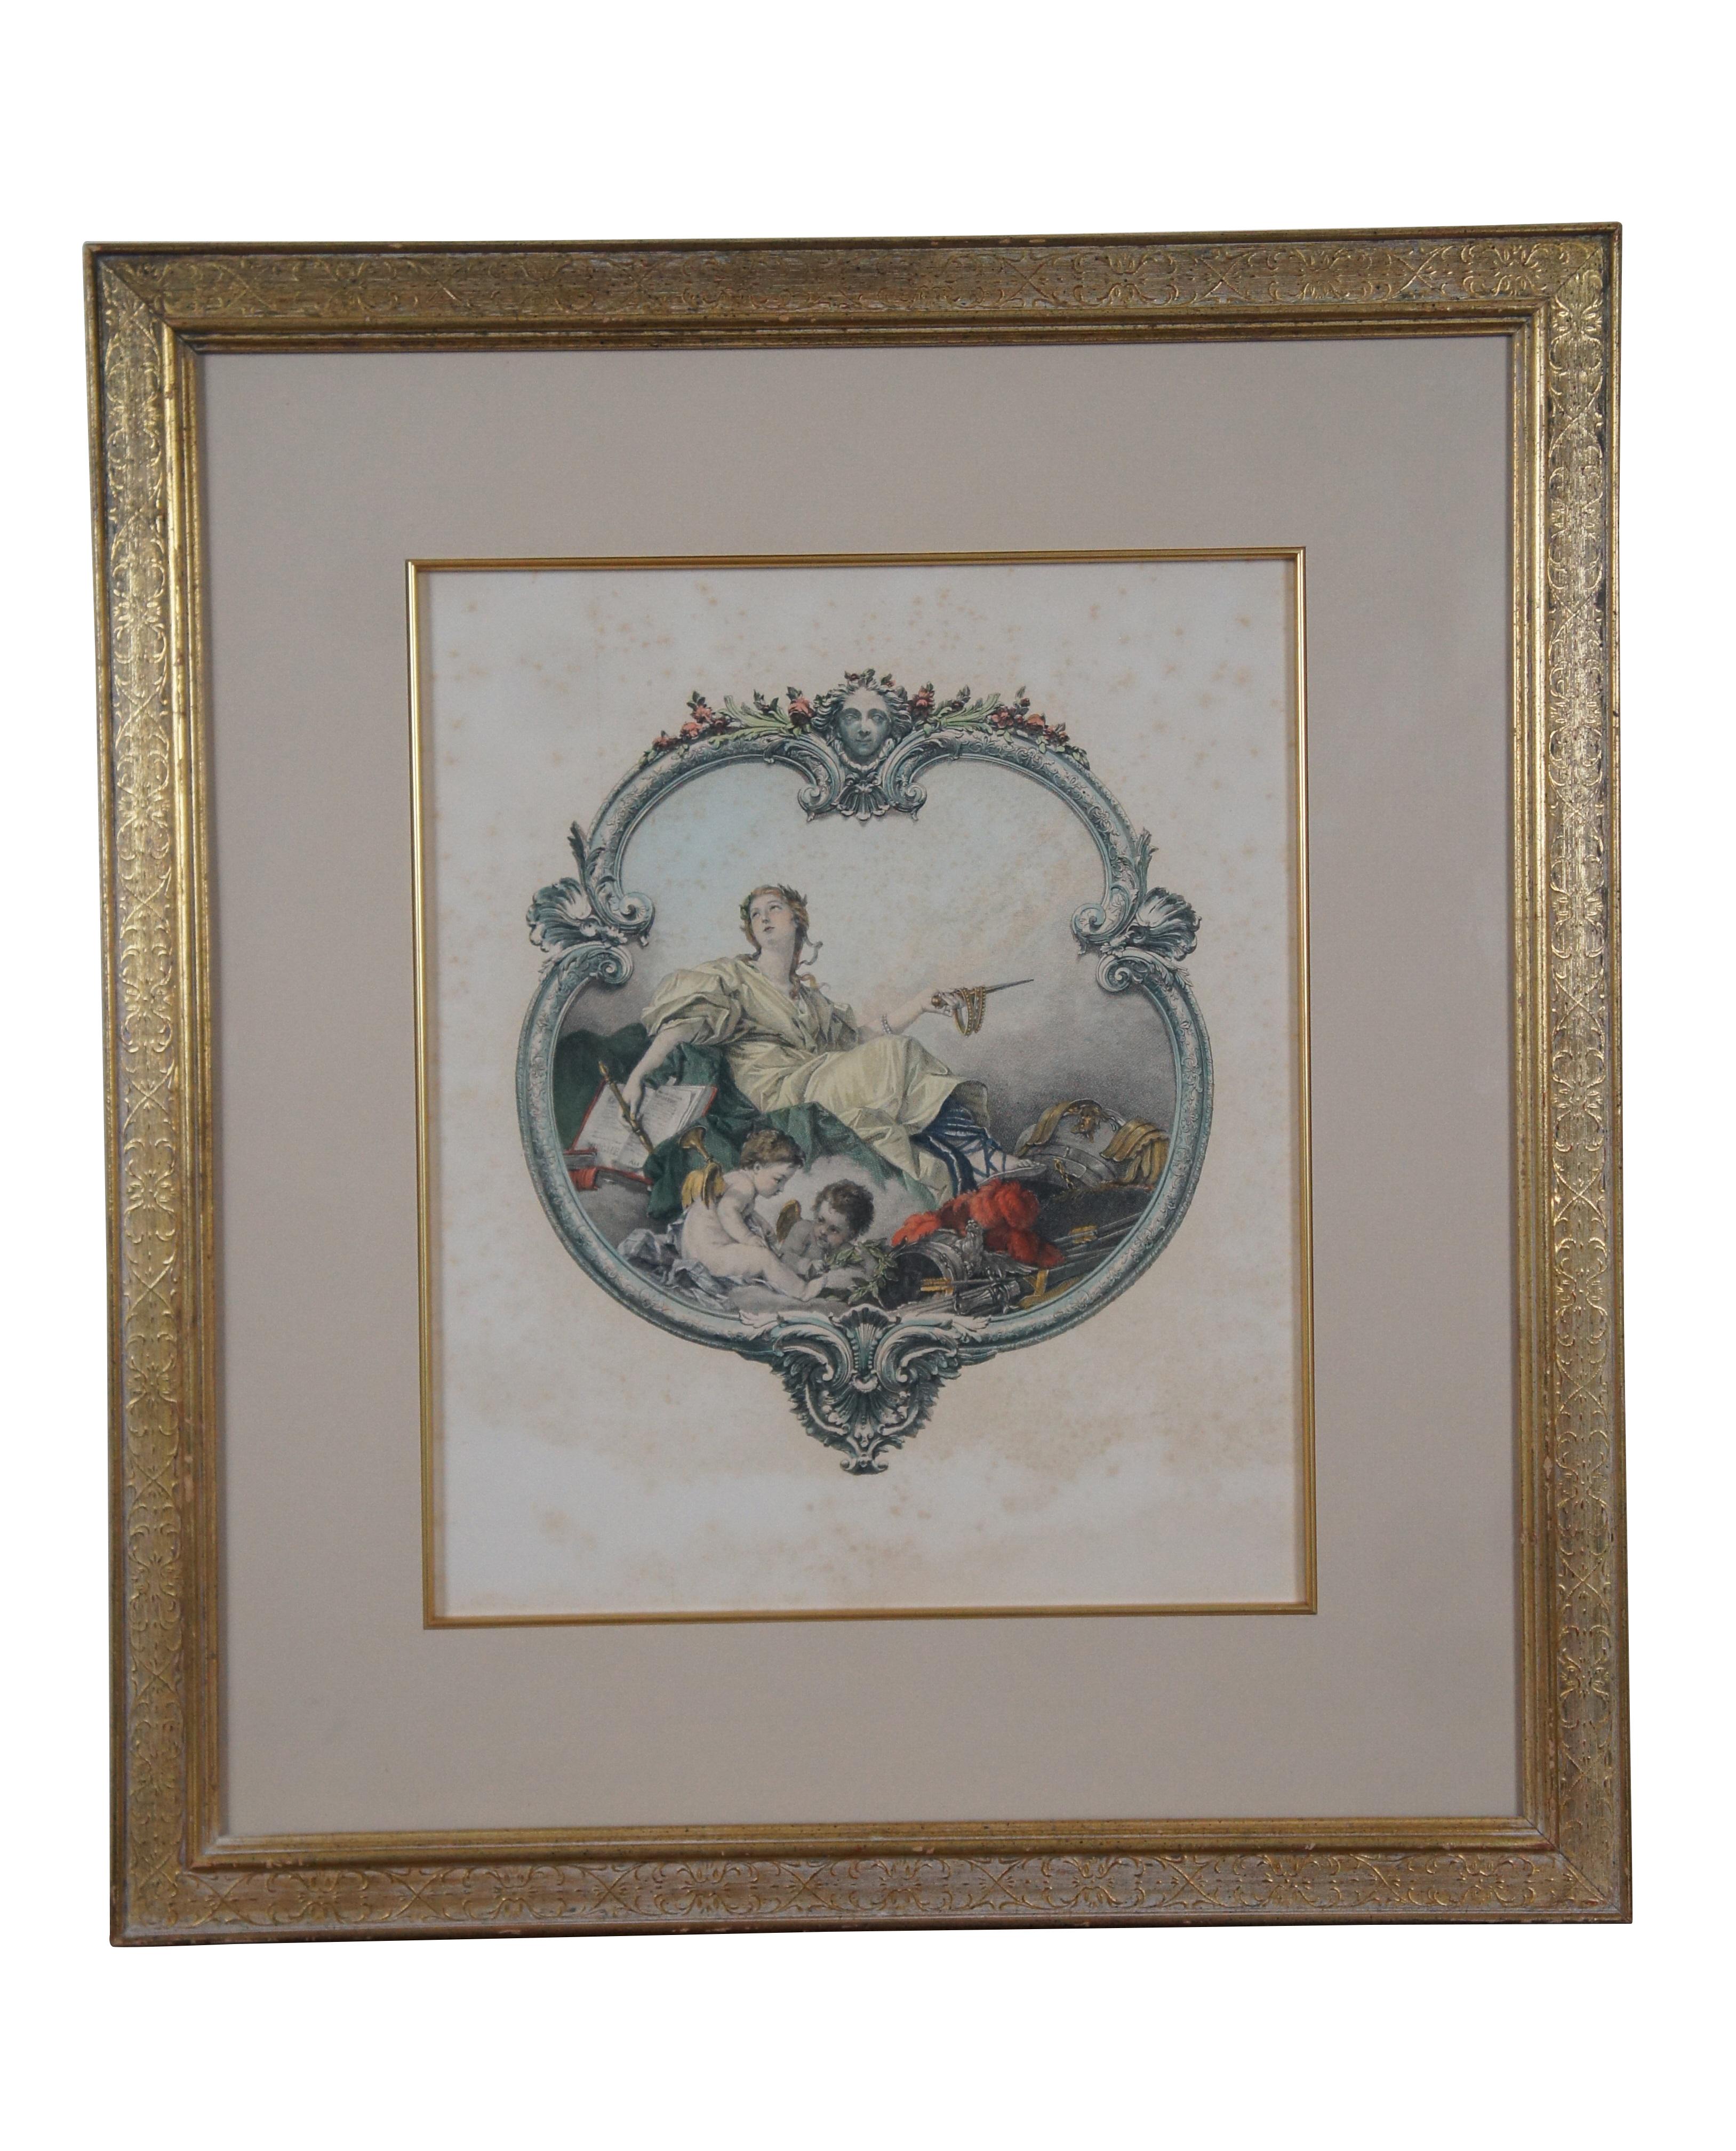 2 Francois Boucher Antique Baroque Mezzotint Poetry Engravings Mother Cherubs In Good Condition For Sale In Dayton, OH